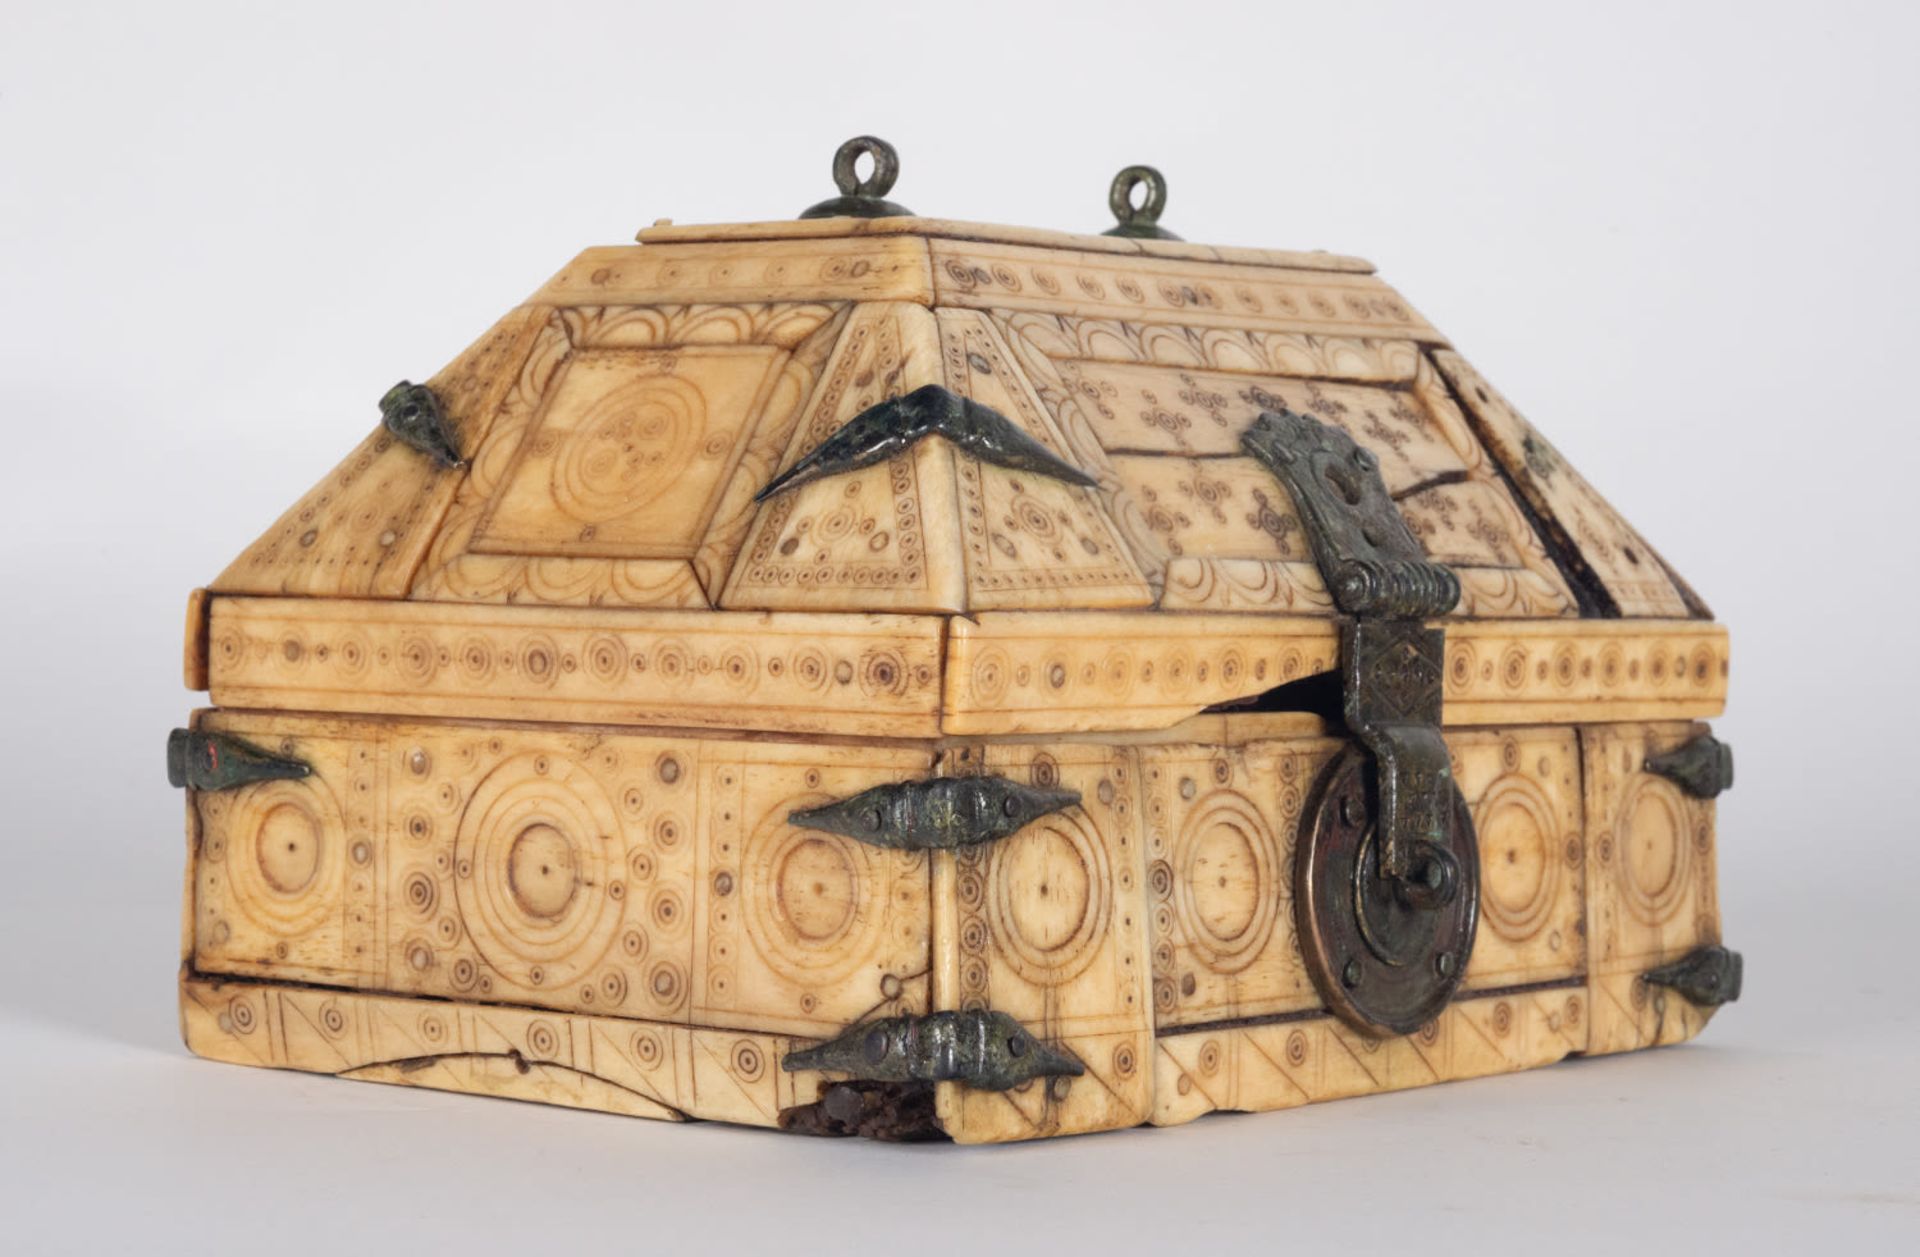 Rare bone box and wrought iron Siculo - Norman casket in the Germanic or Norman style, ex-european p